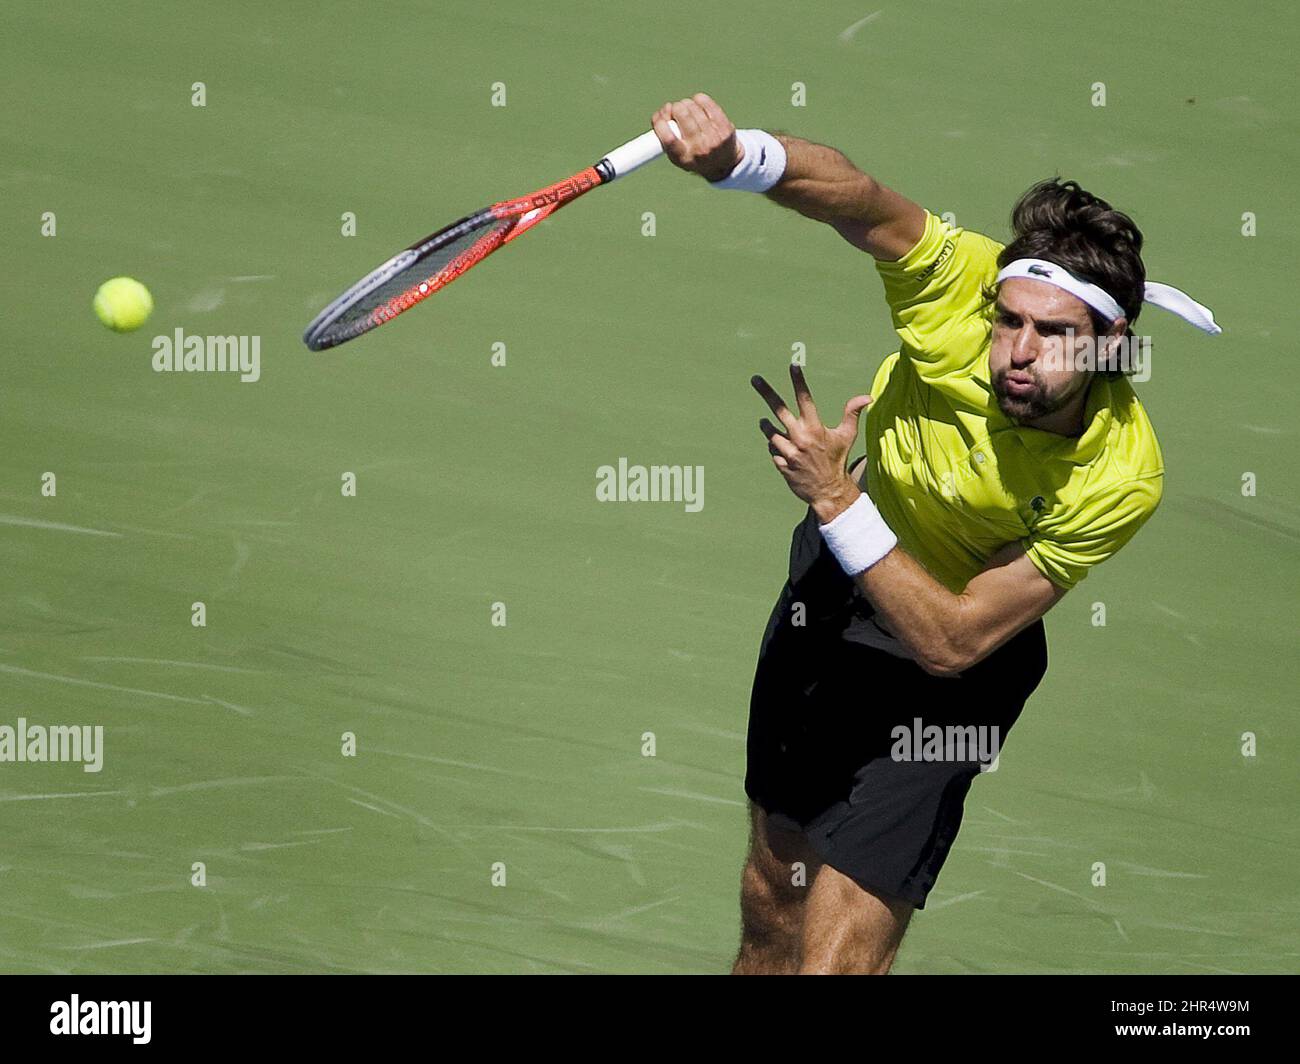 Jeremy Chardy, of France, serves against Donald Young, of the United States, at the Rogers Cup tennis tournament in Toronto, Monday Aug. 6, 2012. (AP Photo/The Canadian Press, Aaron Vincent Elkaim) Stock Photo